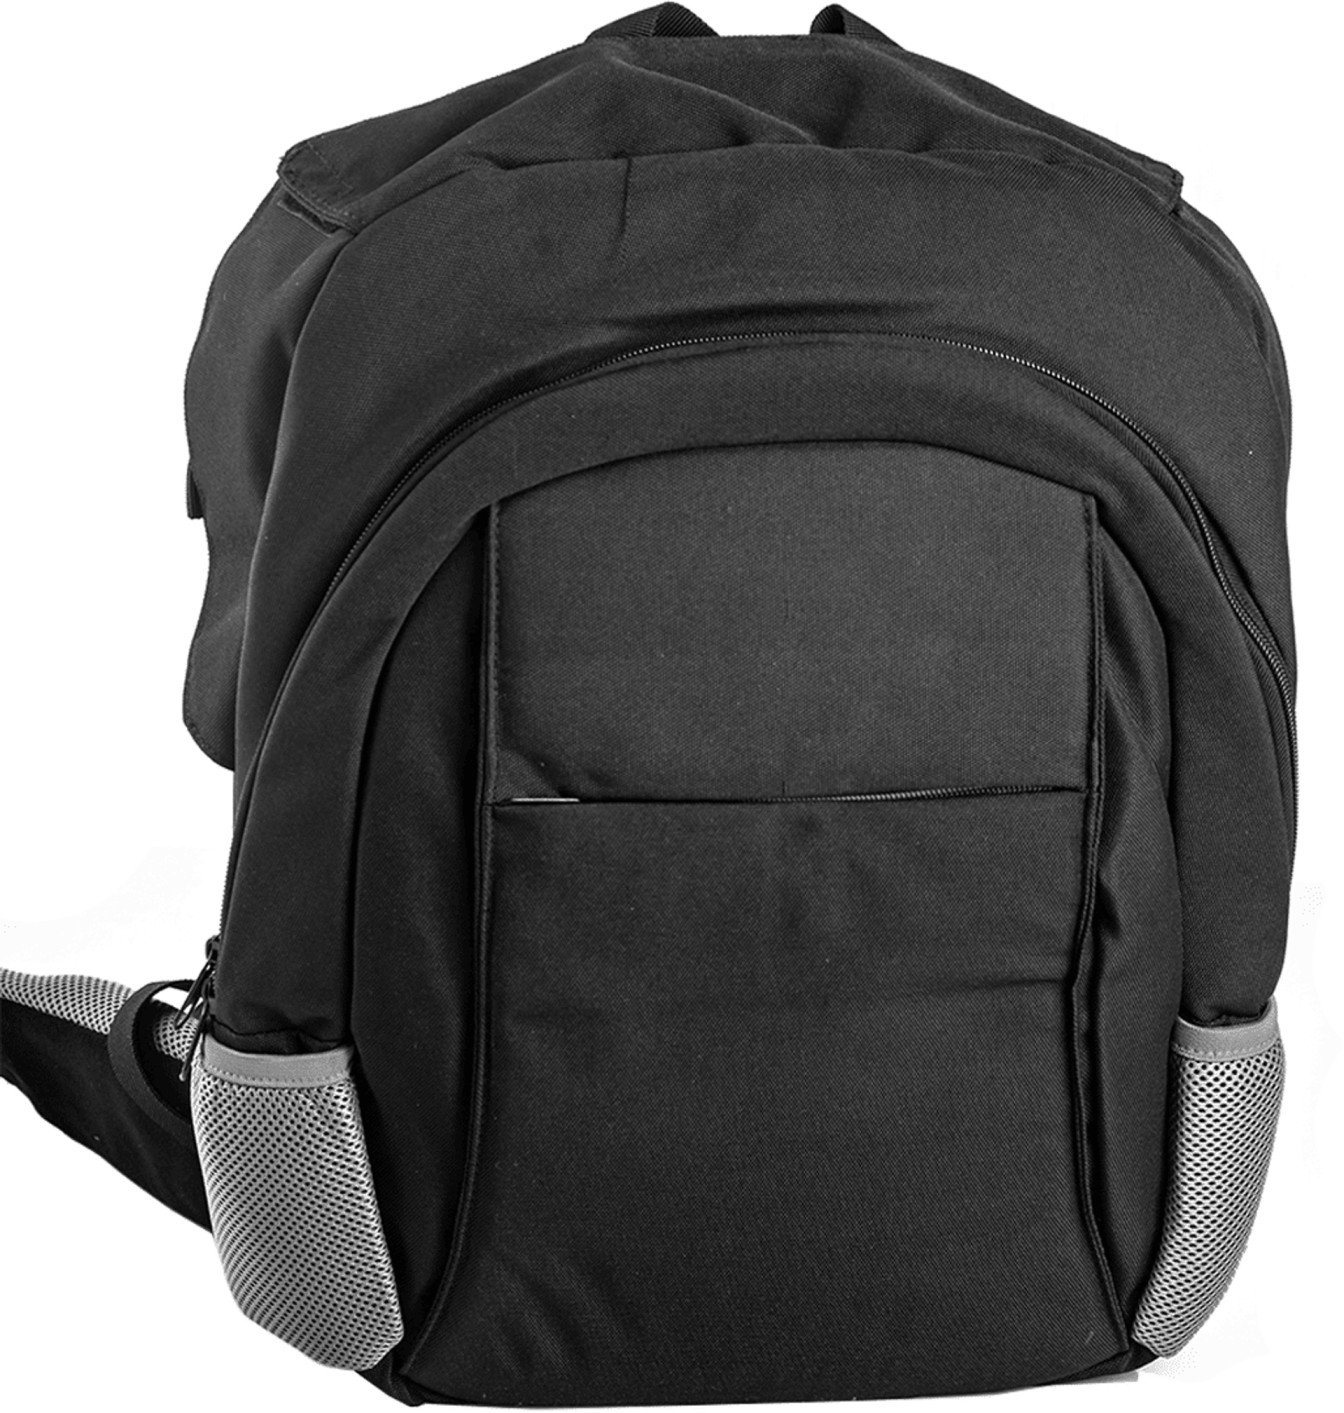 Key Features To Look For When Buying A Backpack Bulletproof Vest